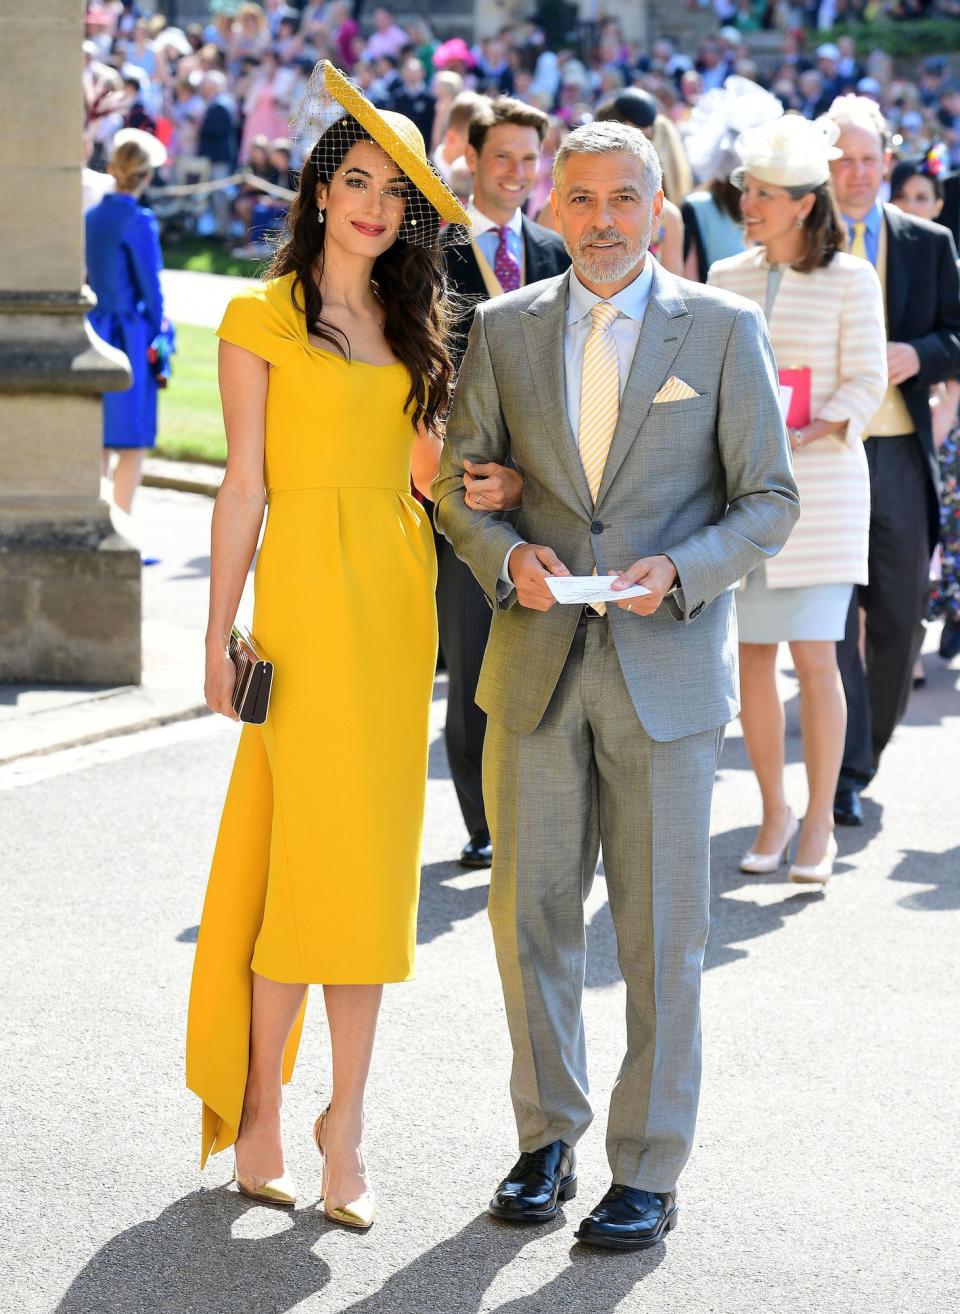 The Clooney's at the wedding of Meghan Markle and Prince Harry on May 19, 2018.